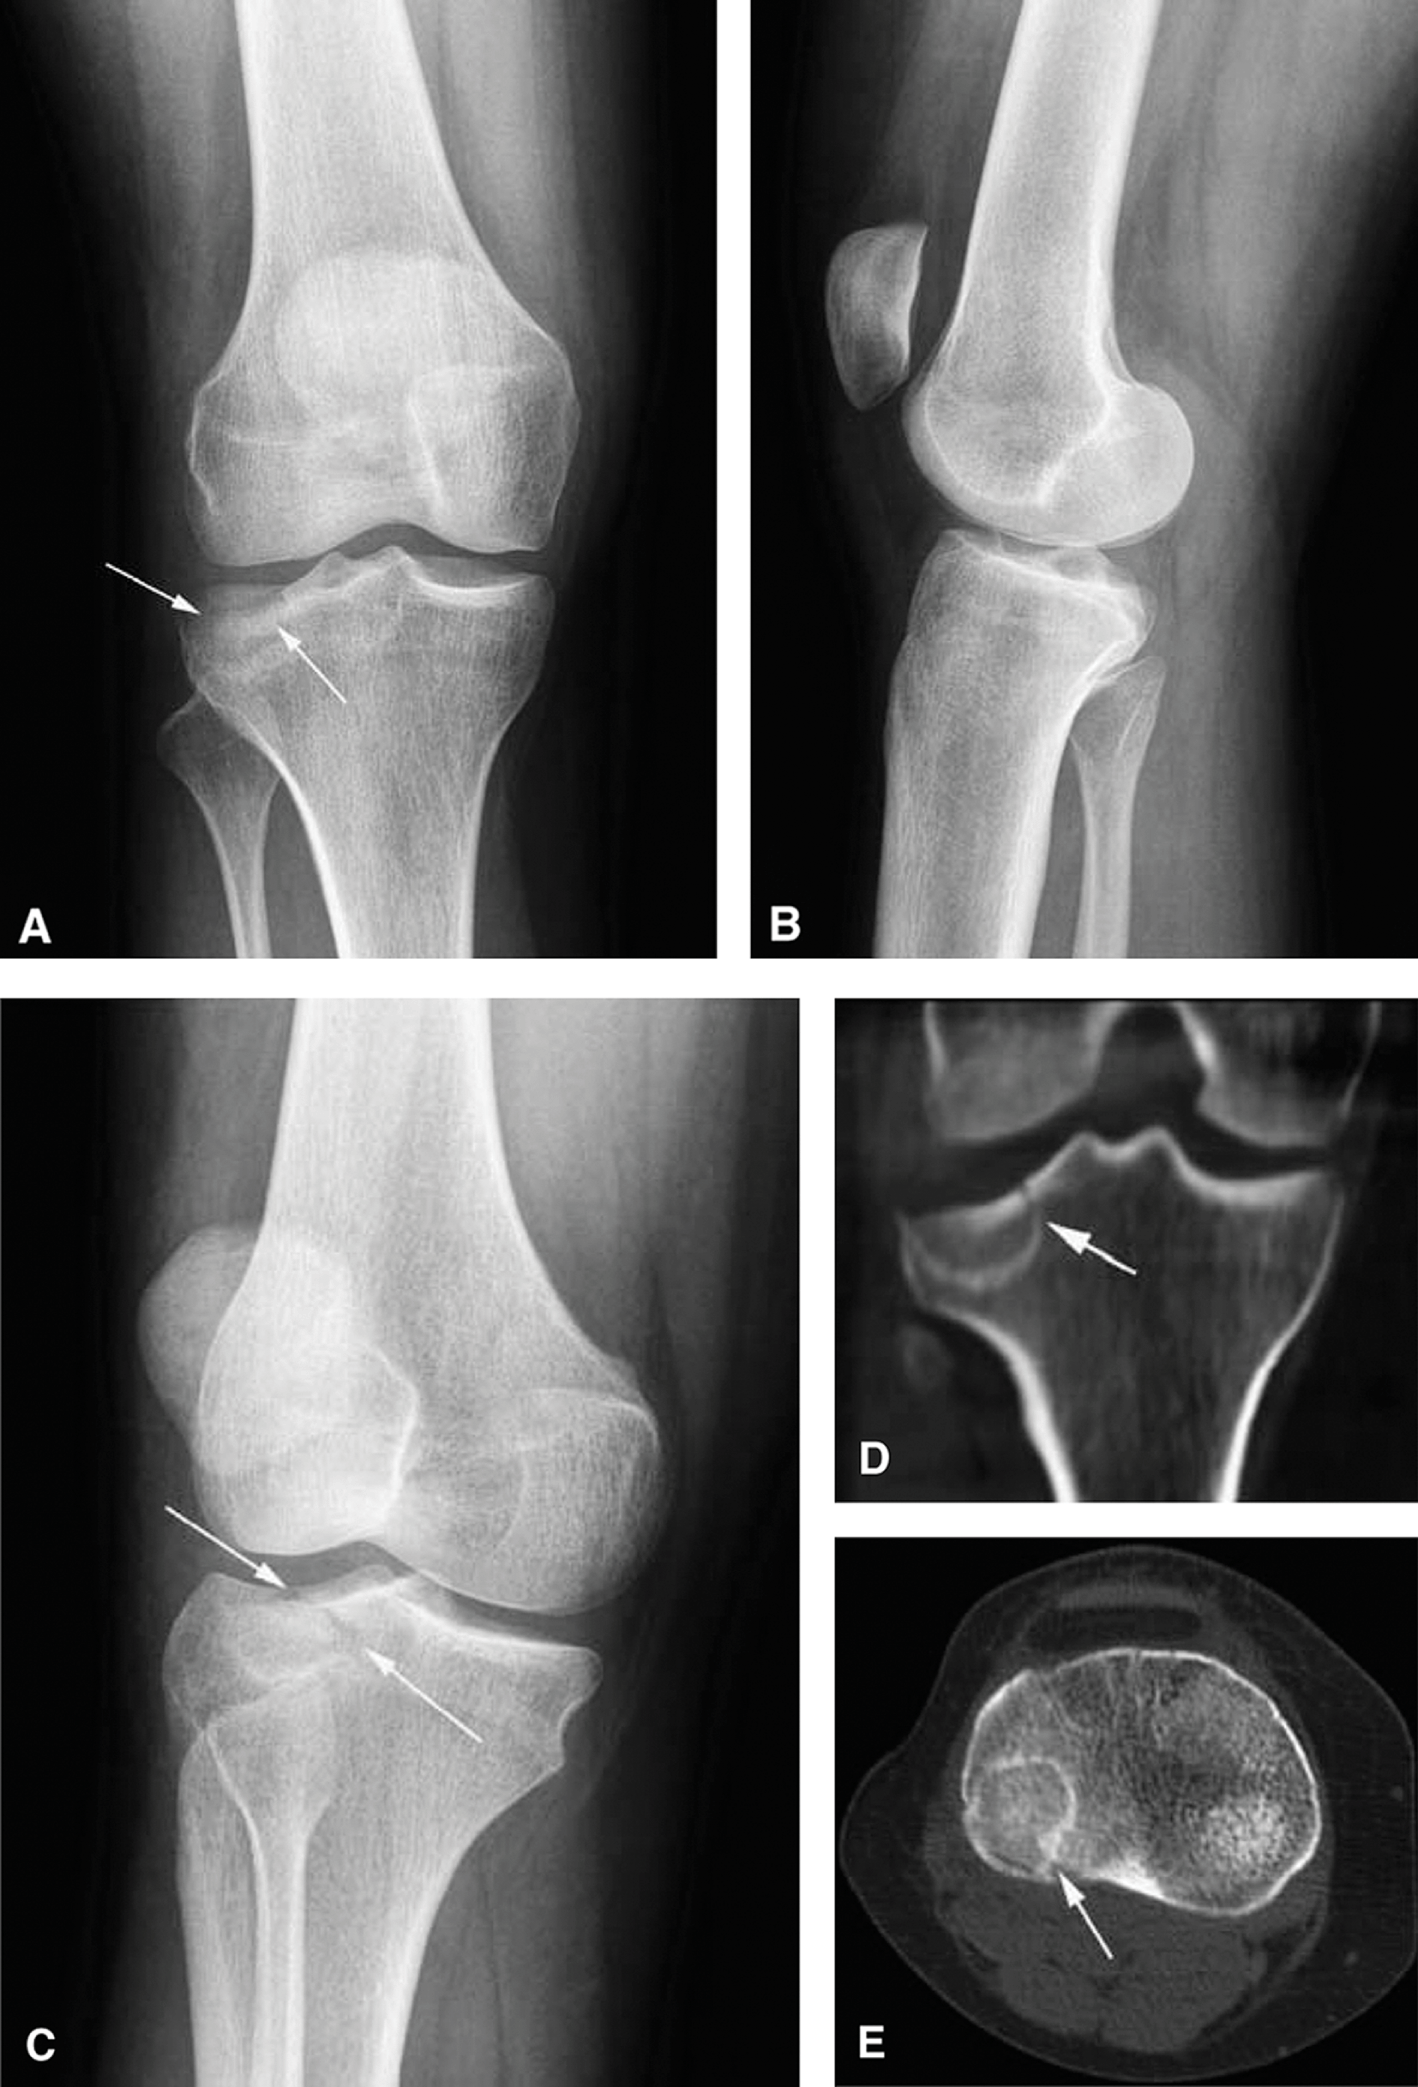 Medial tibial plateau stress fracture radiology